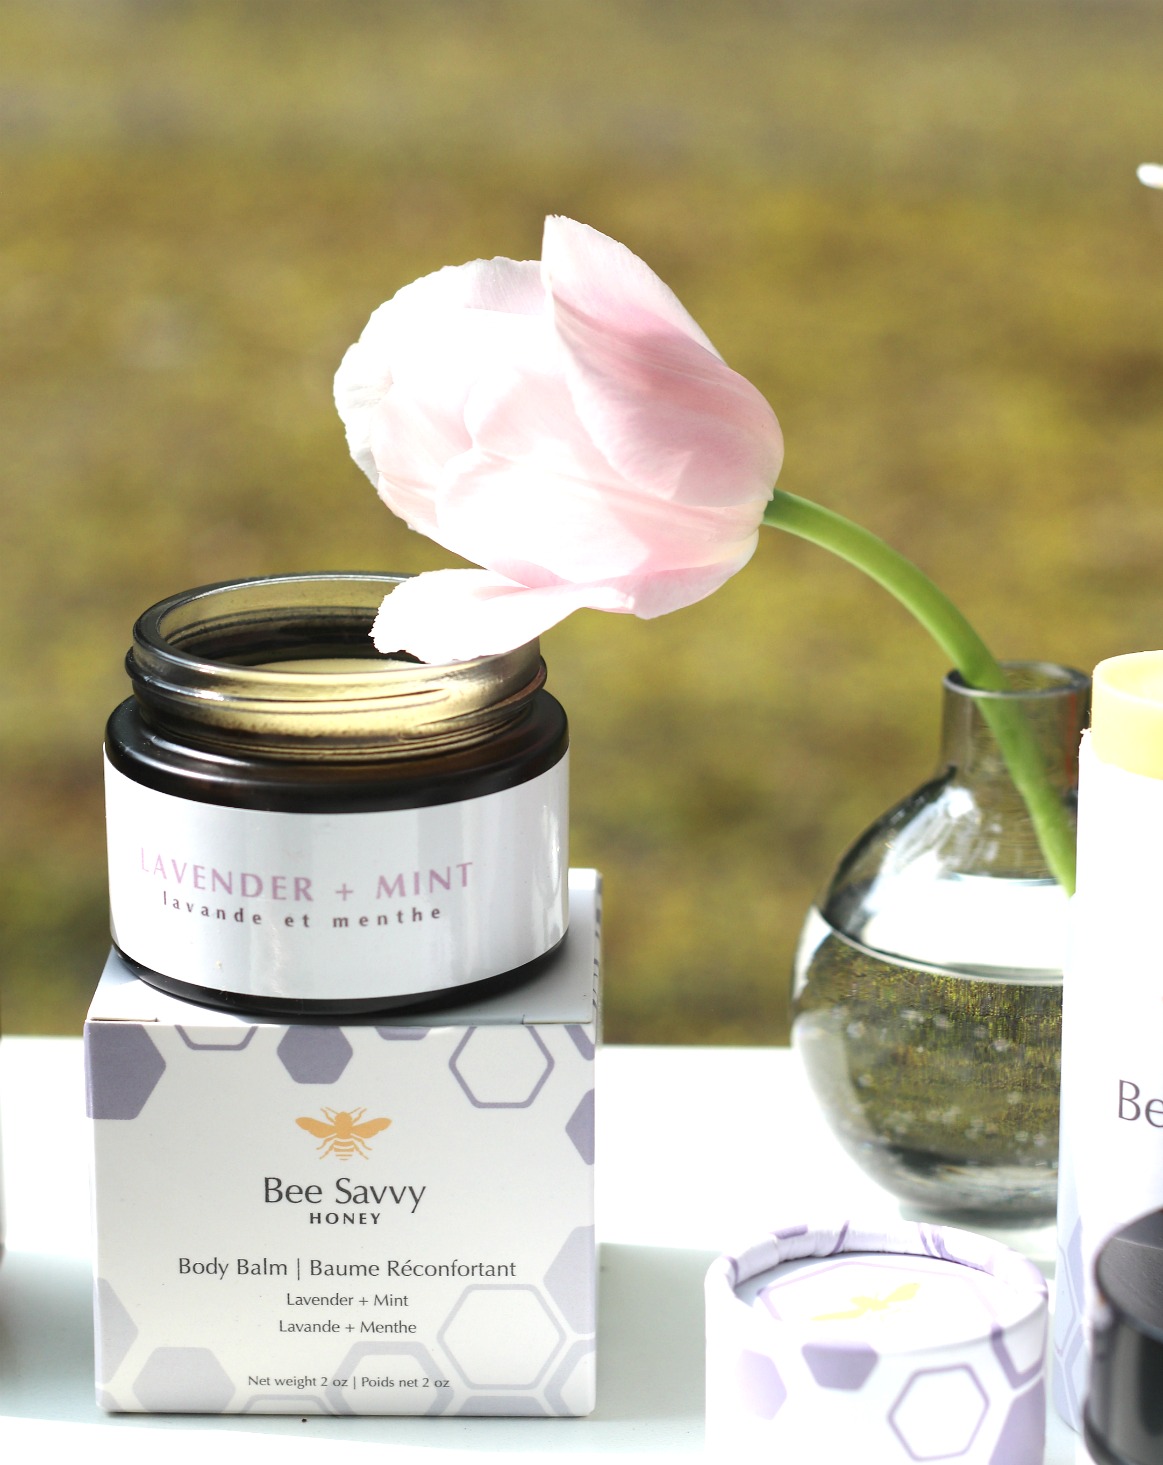 Bee Savvy Honey lavender and mint body balm vertical